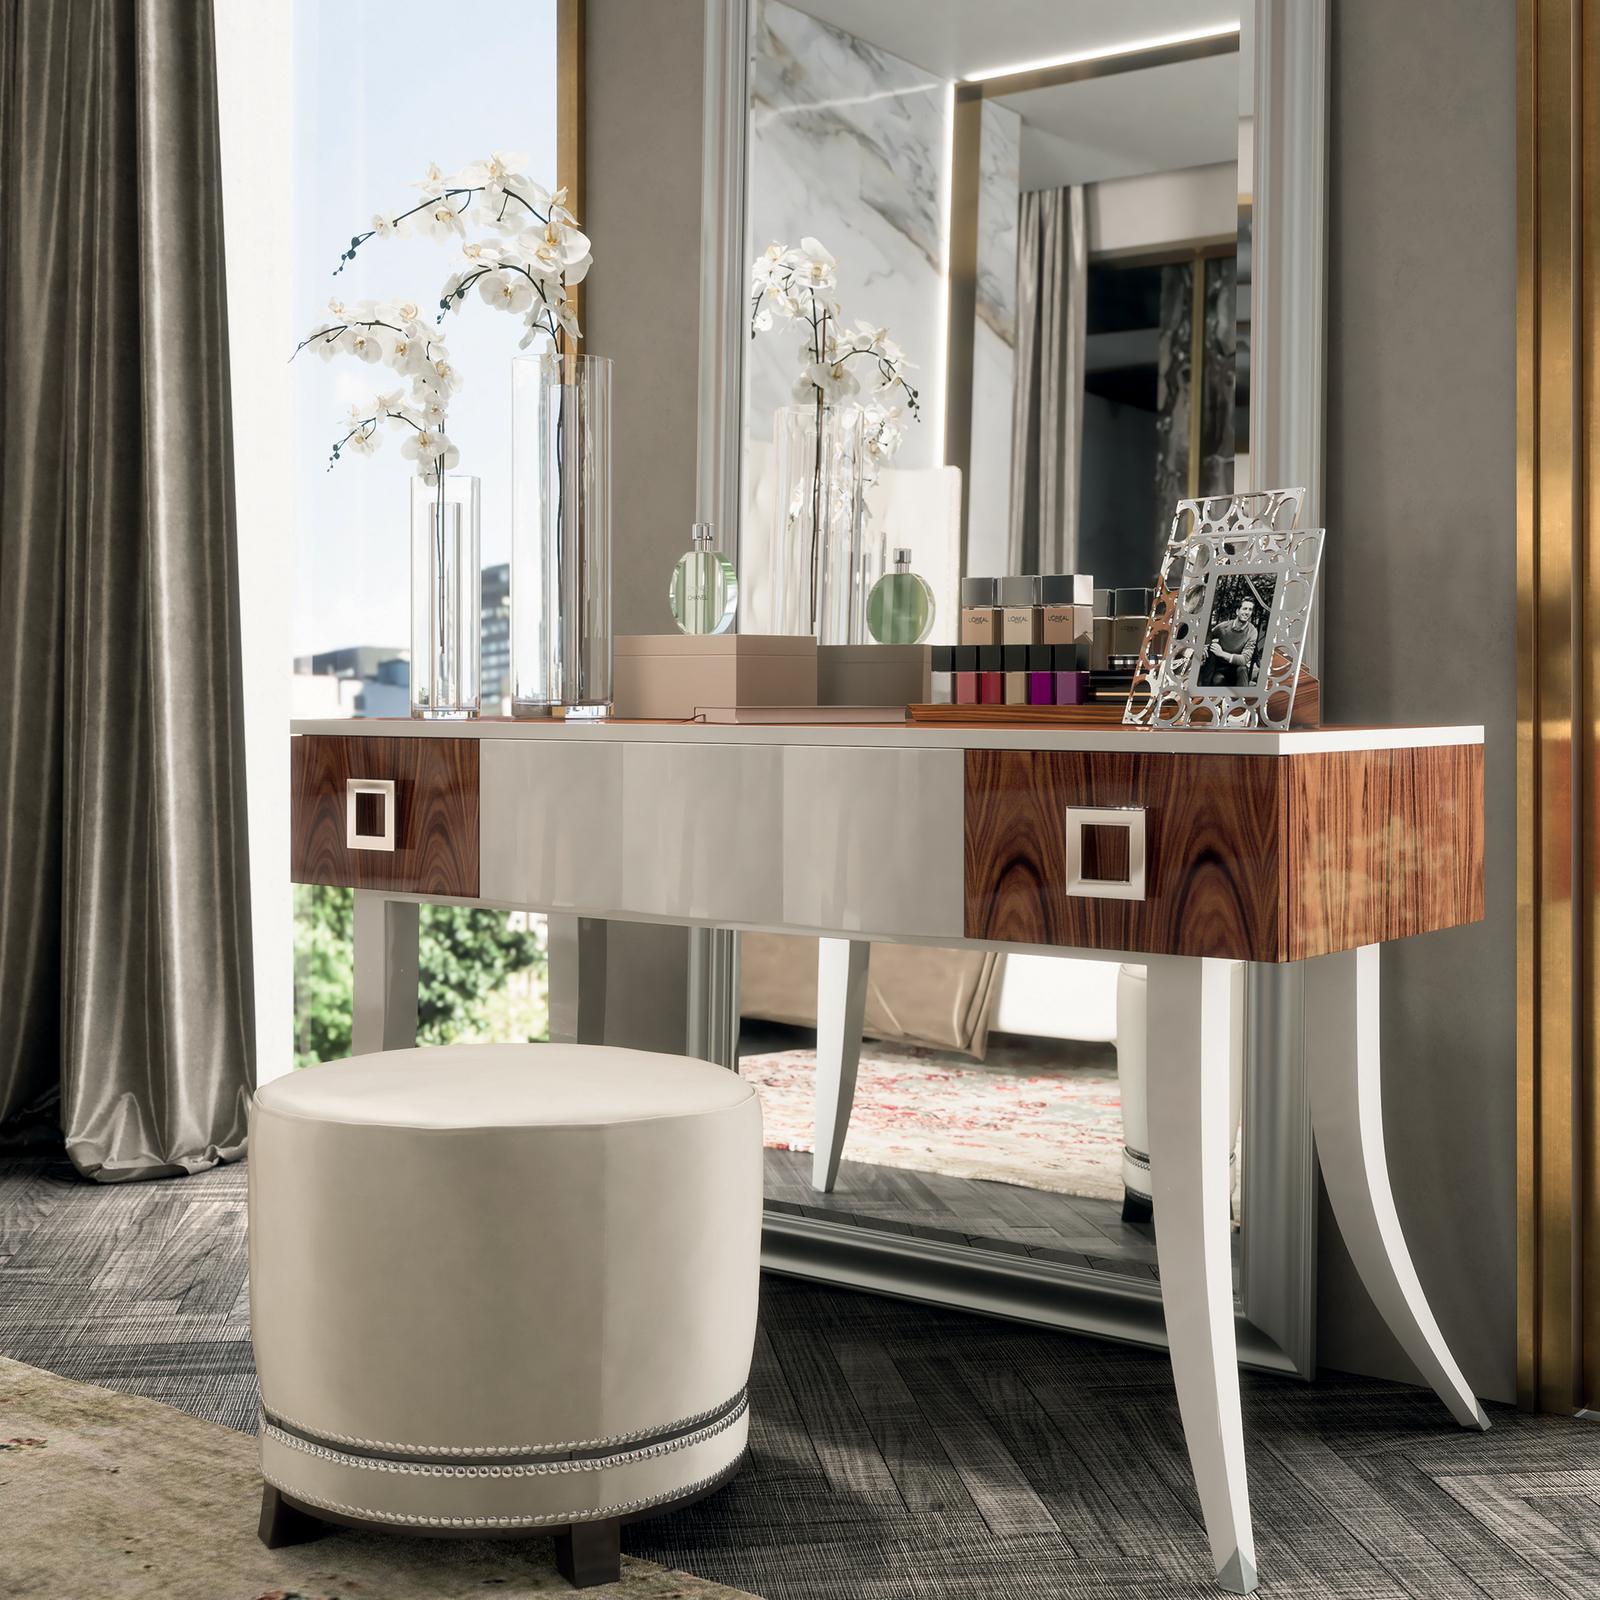 This captivating vanity table featuring 2 side drawers and 1 central drawer with push pull blumotion is a furnishing piece of refined quality. Crafted with elements in Santos rosewood, it offers a splendid polished finish and silver leaf detail for